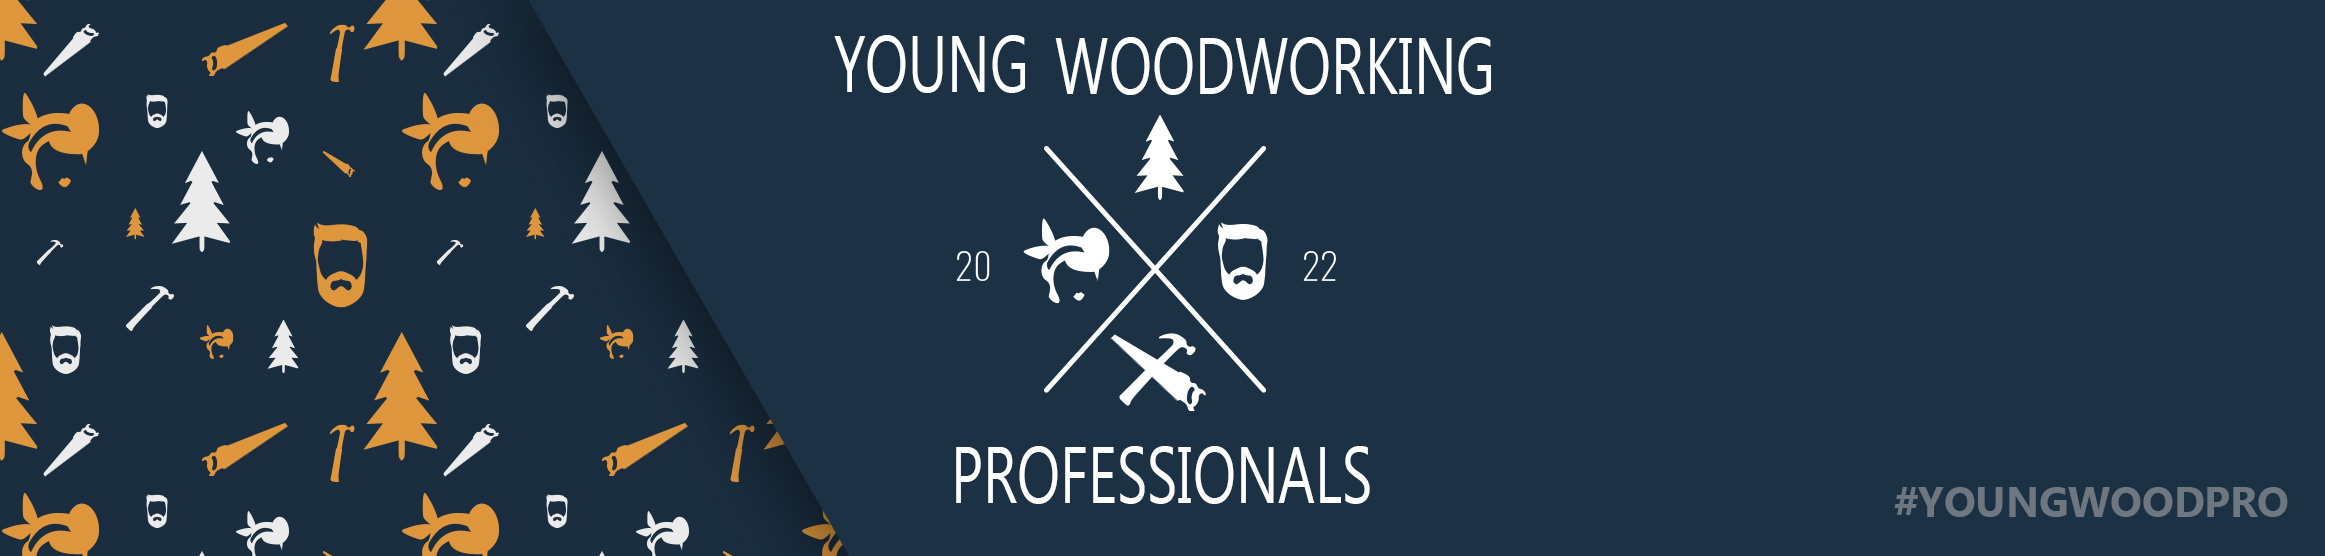 Young Woodworking Professionals Contest